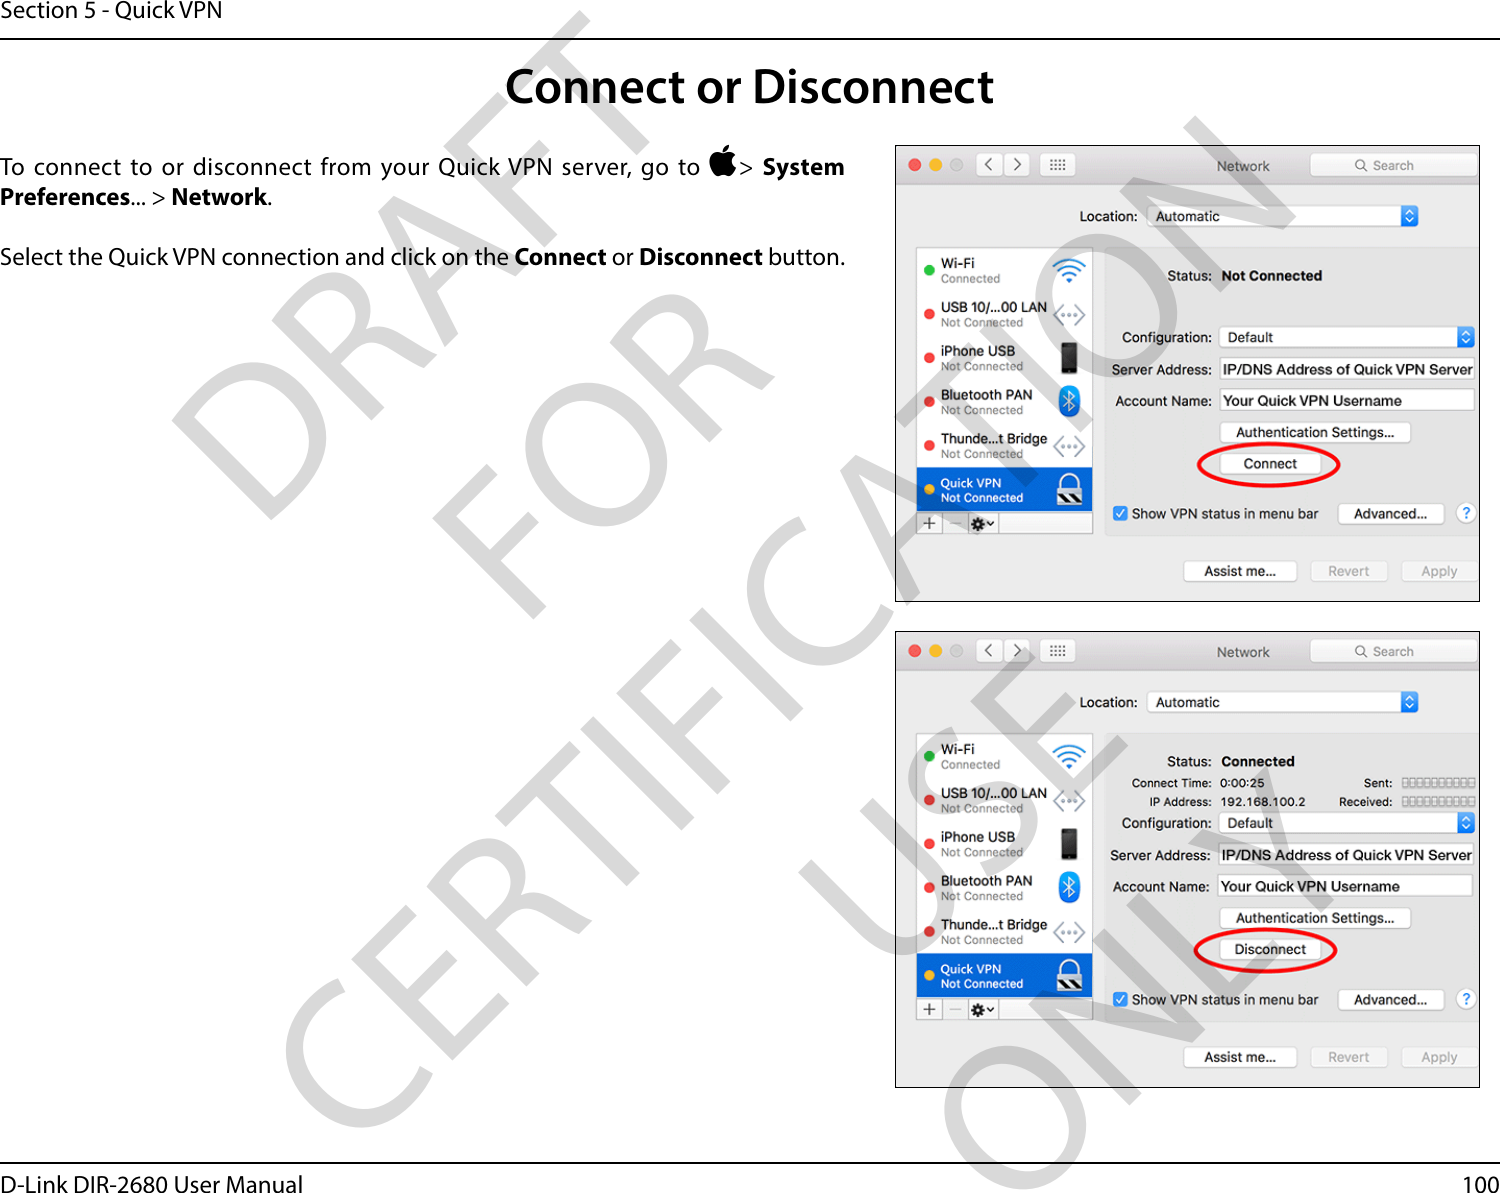 100D-Link DIR-2680 User ManualSection 5 - Quick VPNConnect or DisconnectTo connect to or disconnect from your Quick VPN server, go to &gt; System Preferences... &gt; Network.Select the Quick VPN connection and click on the Connect or Disconnect button.DRAFT FOR CERTIFICATION USE ONLY